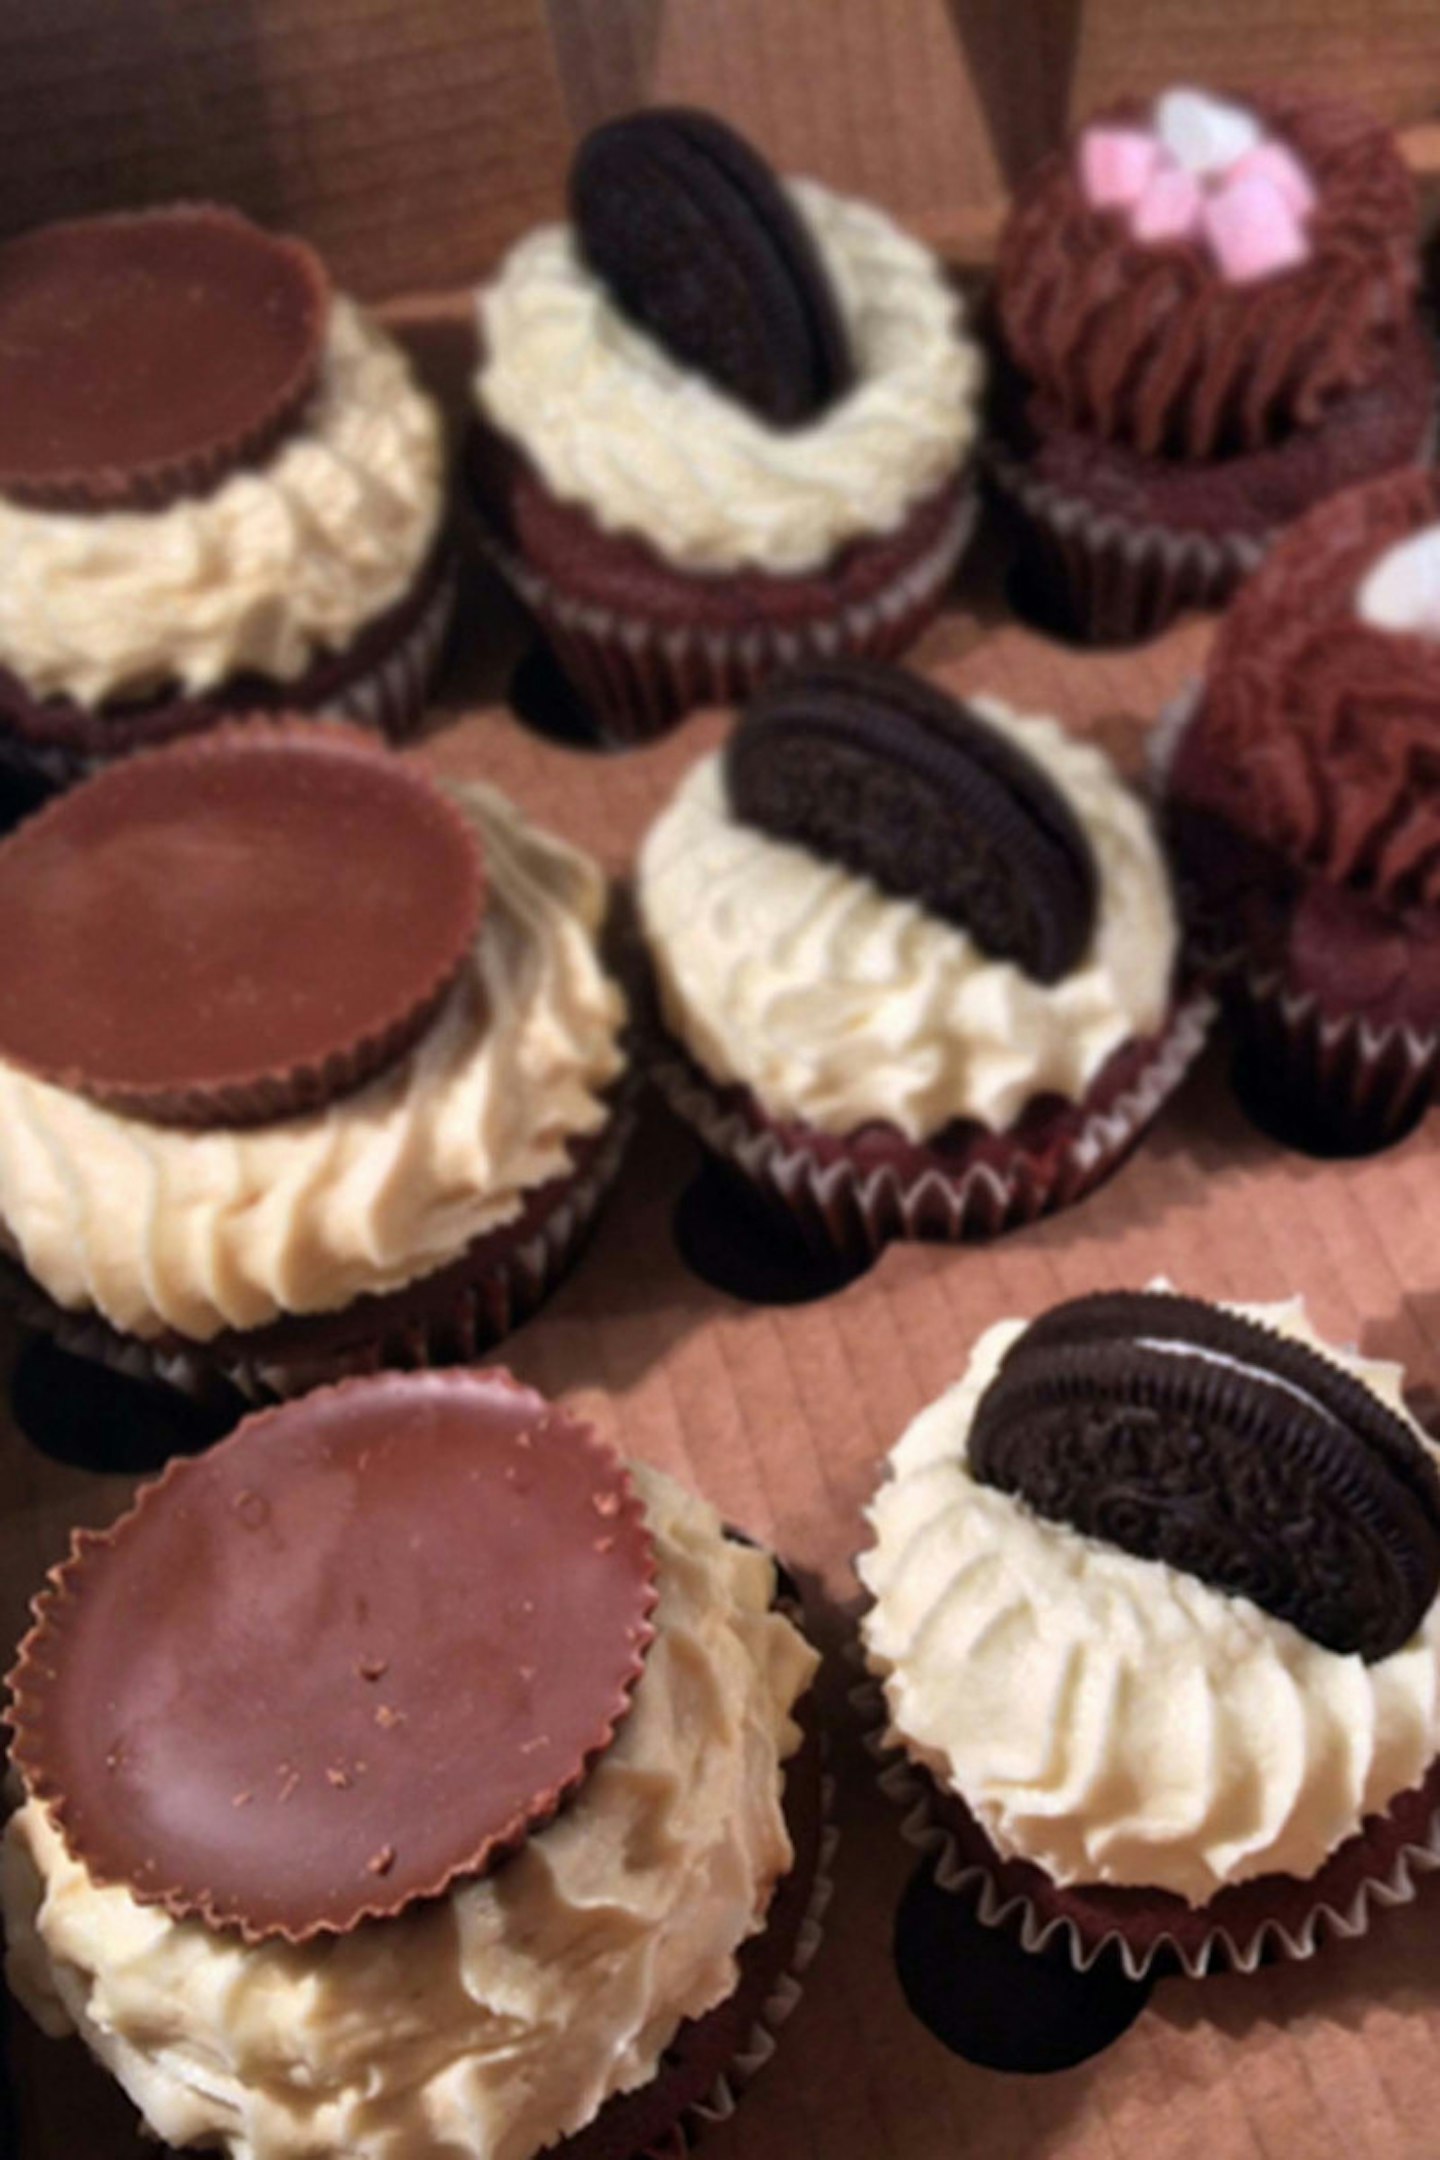 8. Peanut Butter Cup Cupcakes